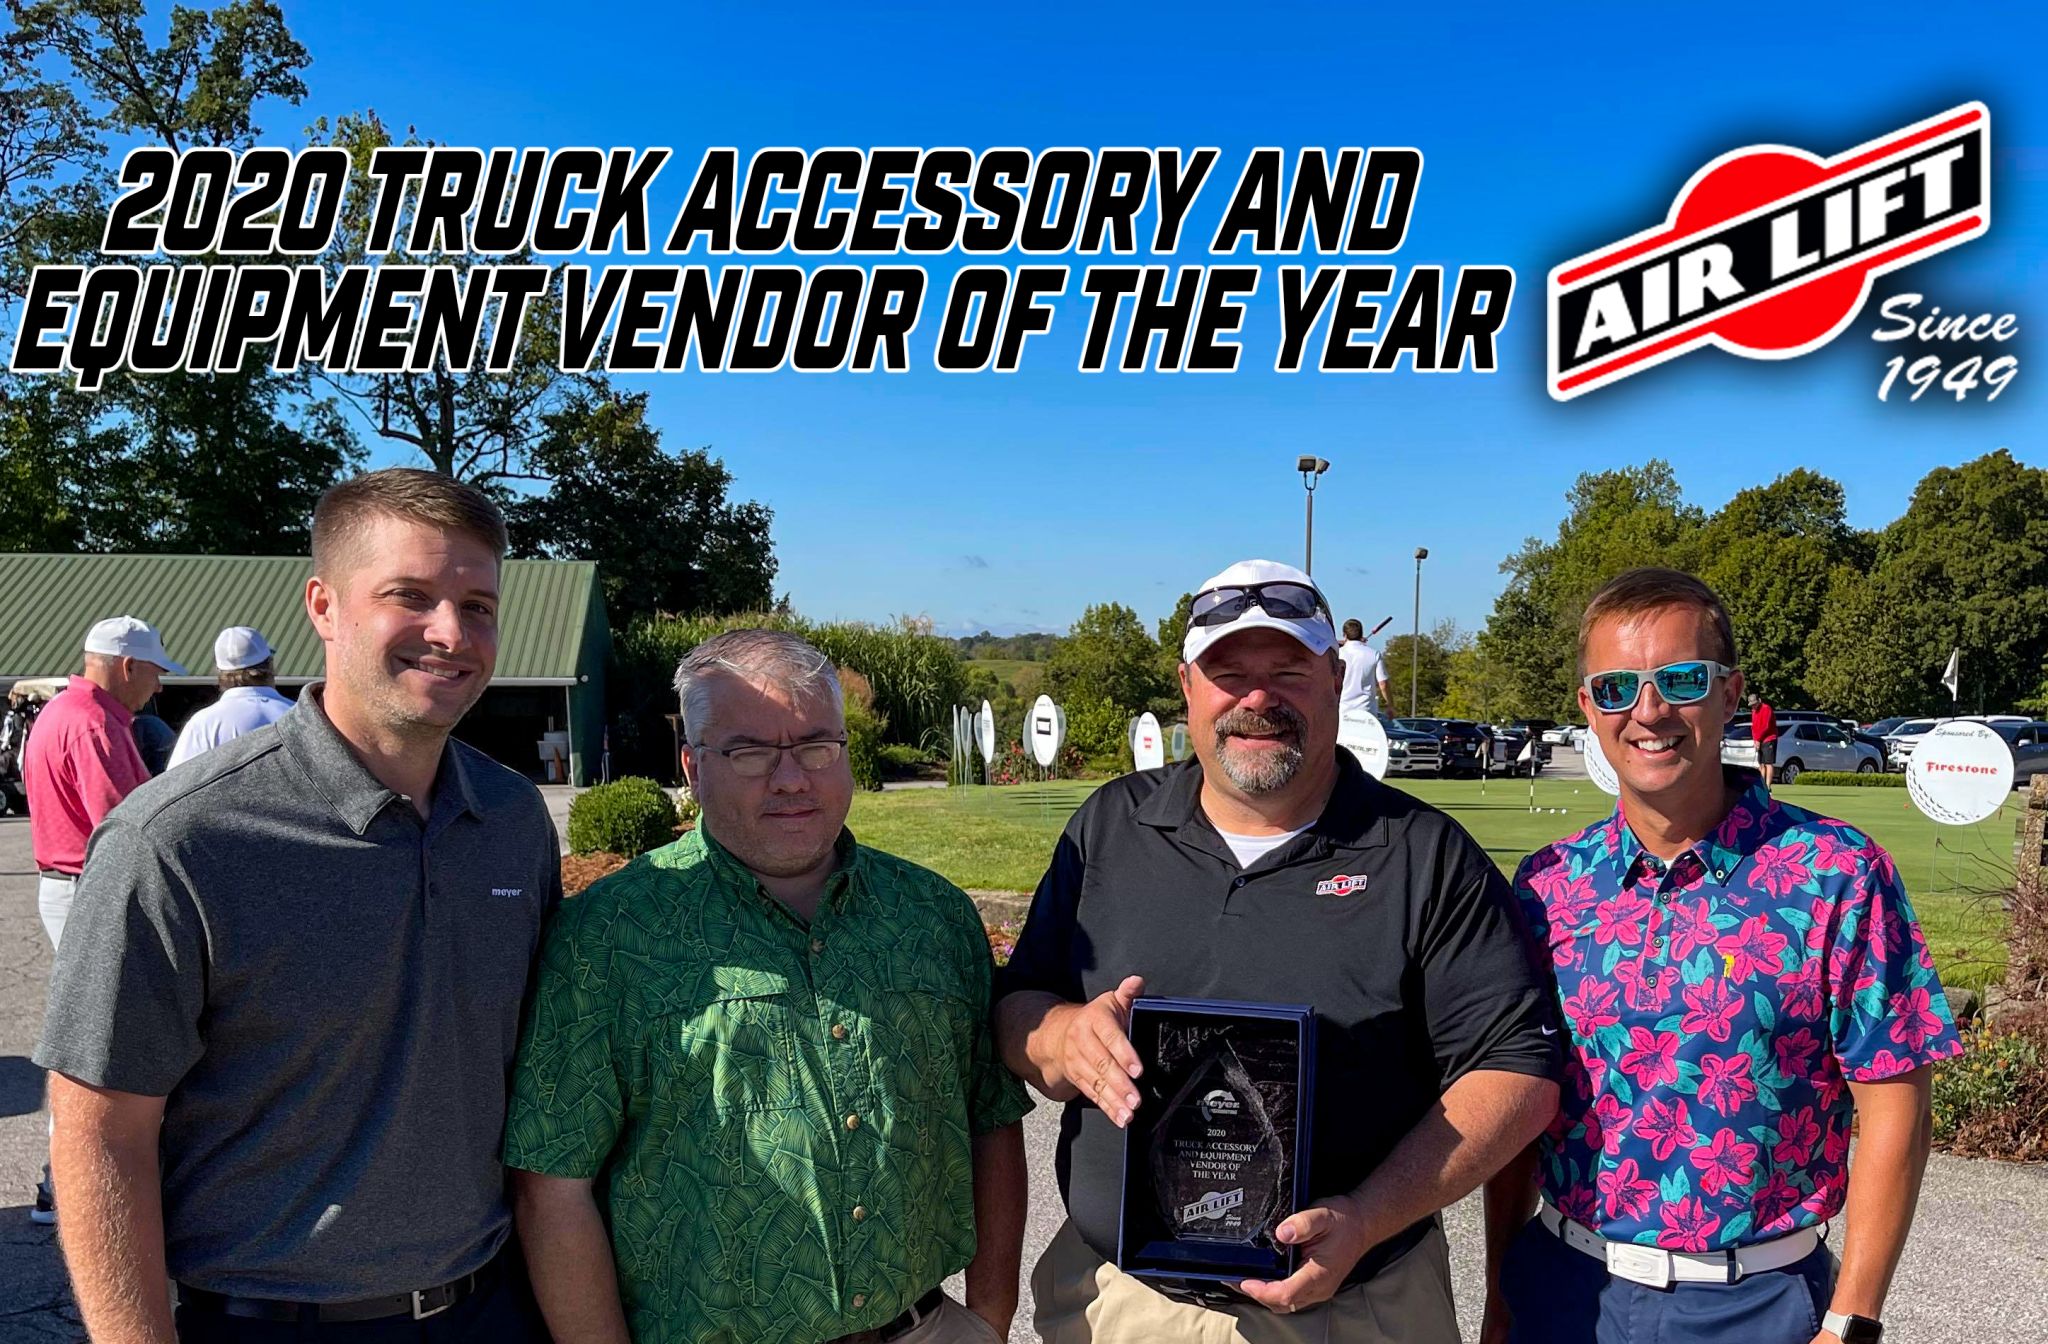 Air Lift Company Receives Meyer Distributing 2020 Truck Accessory and Equipment Vendor of the Year Award | THE SHOP